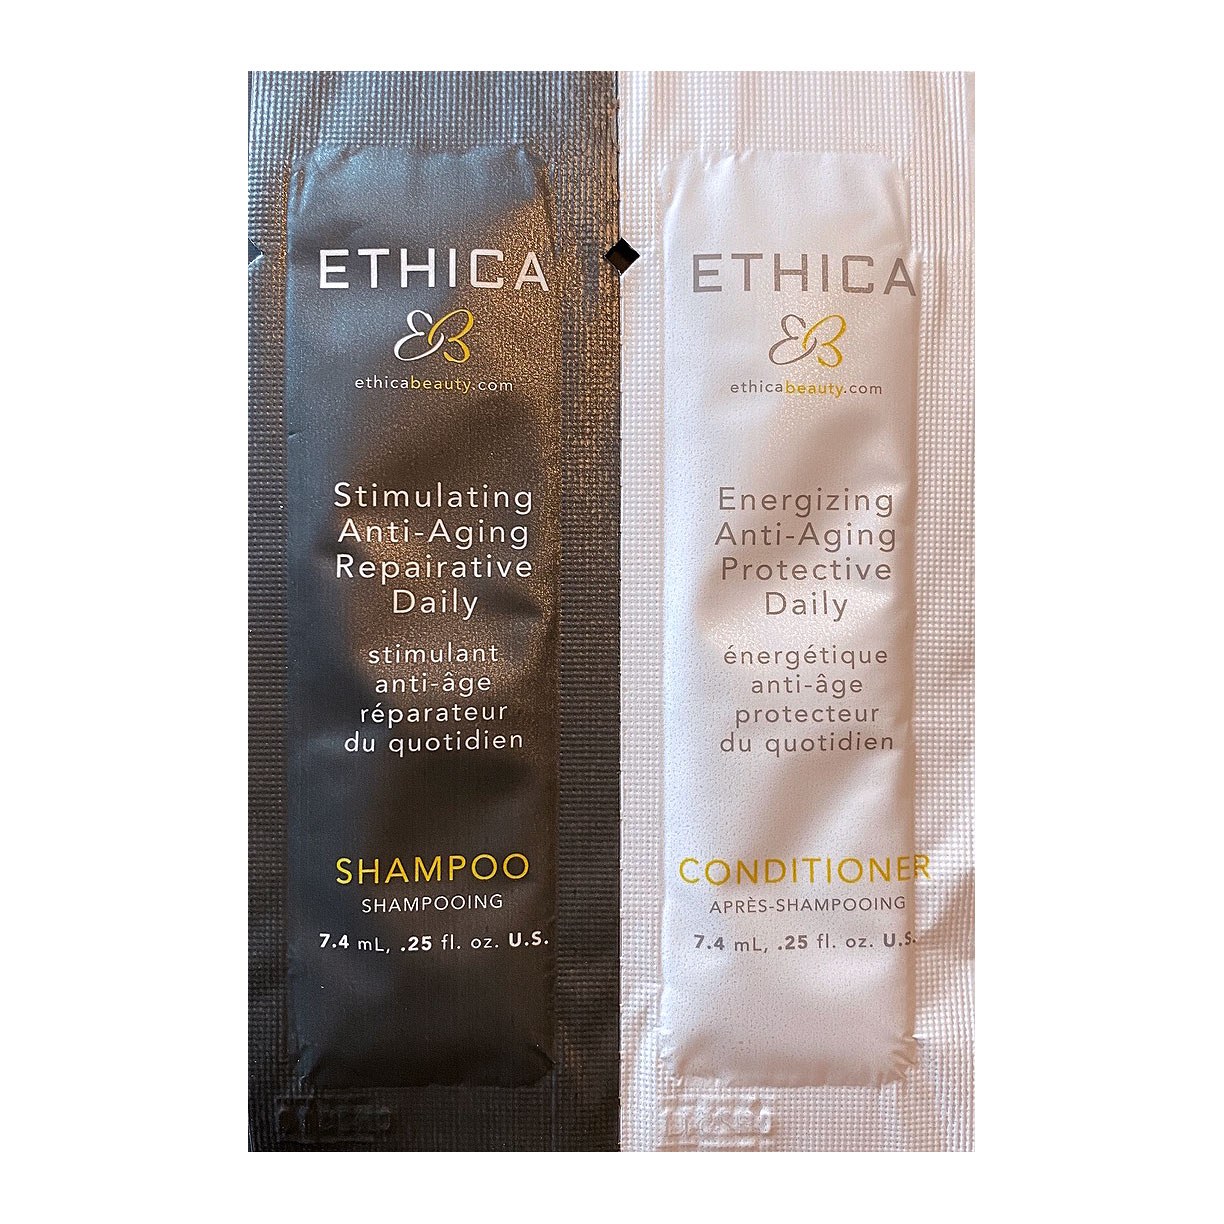 Ethica XTRAS: Daily Shampoo and Conditioner Sample - Anti-Aging